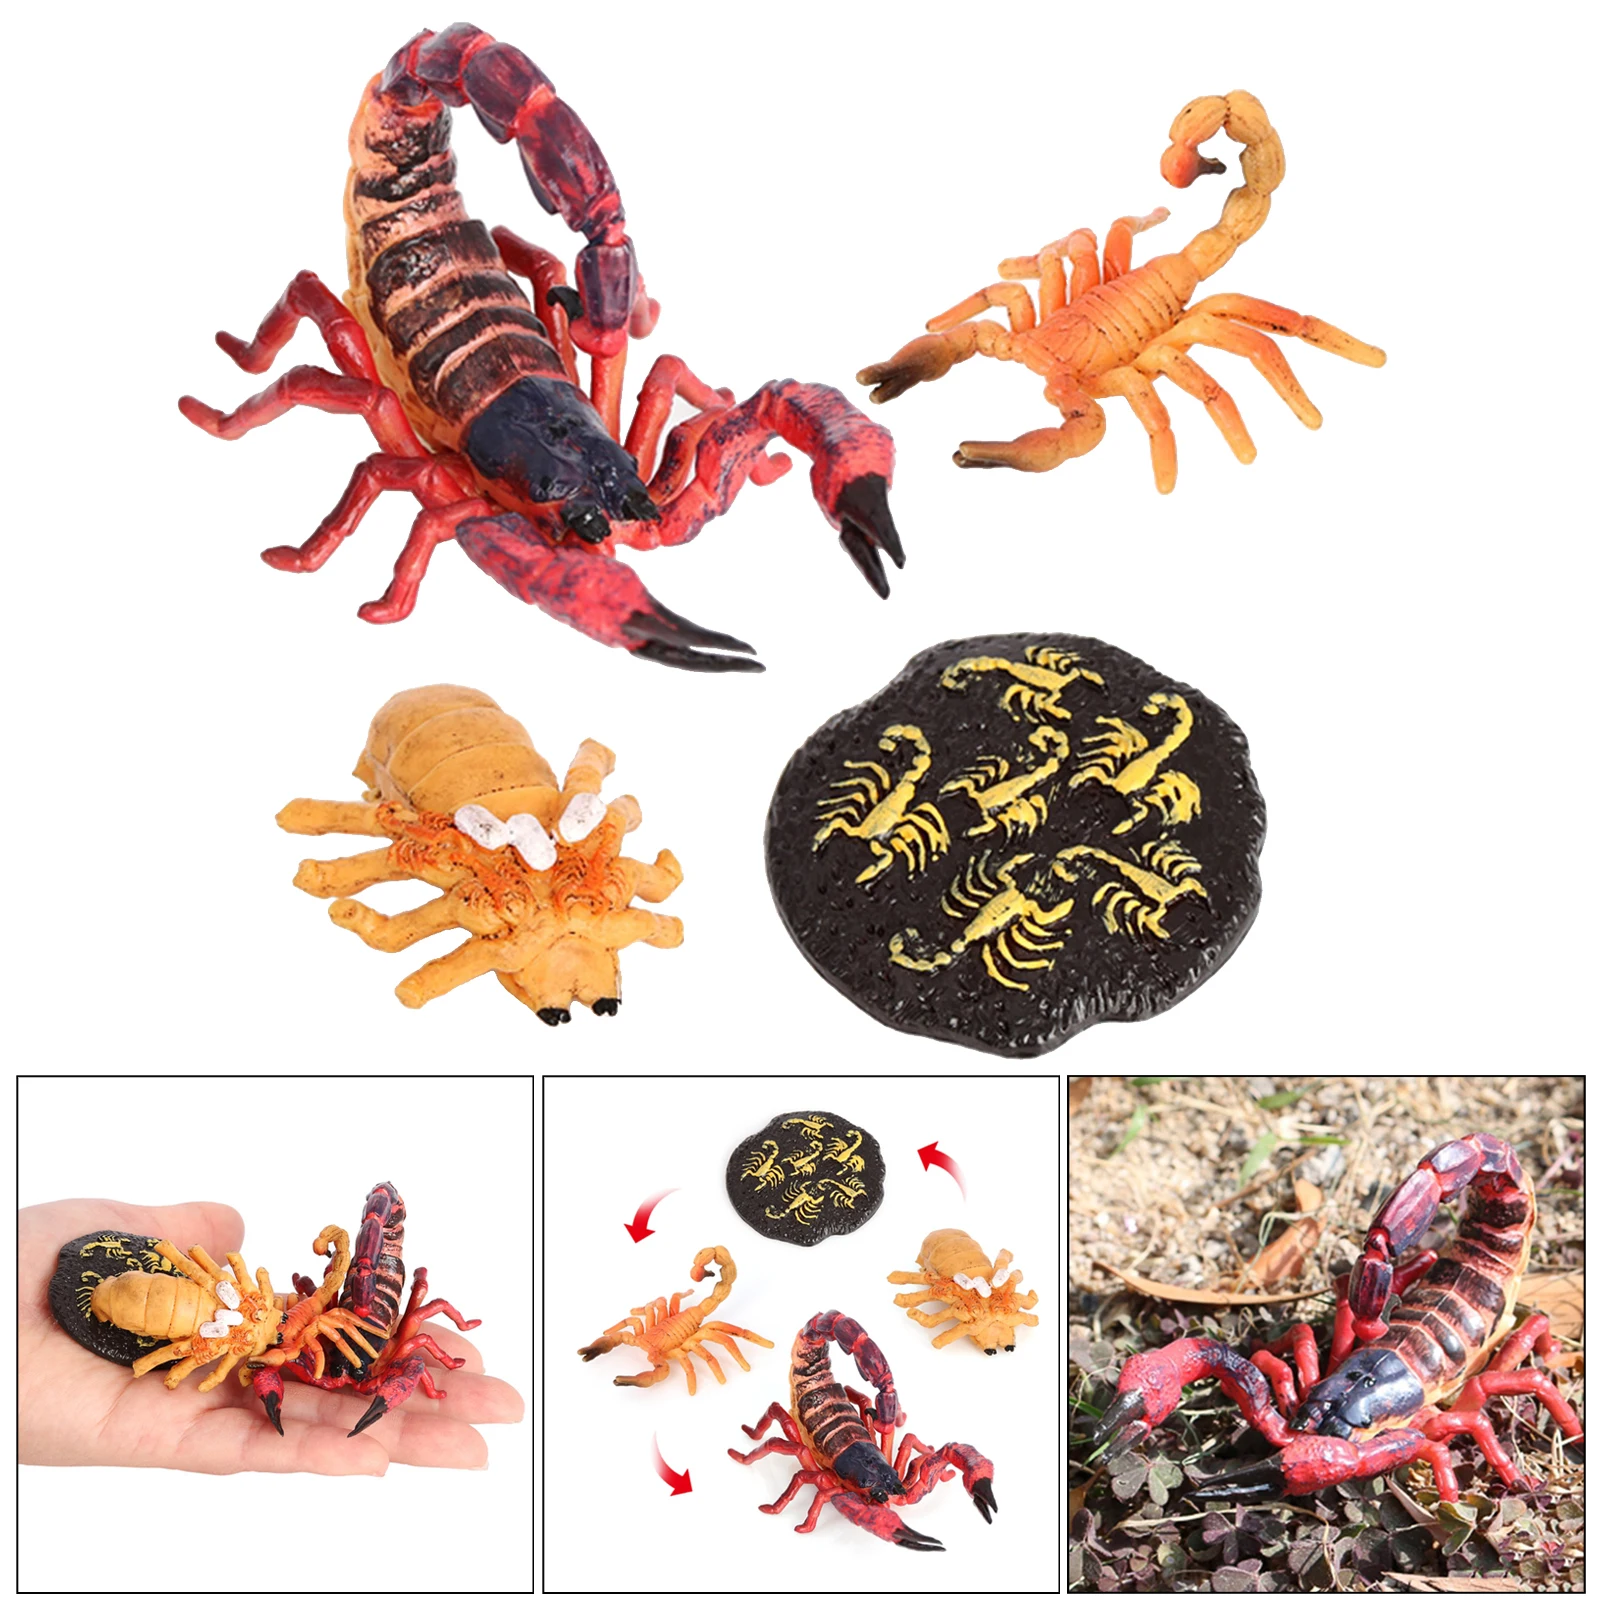 Growth Playset Scorpion Life Cycle Model Action Toy Children`s Preschool